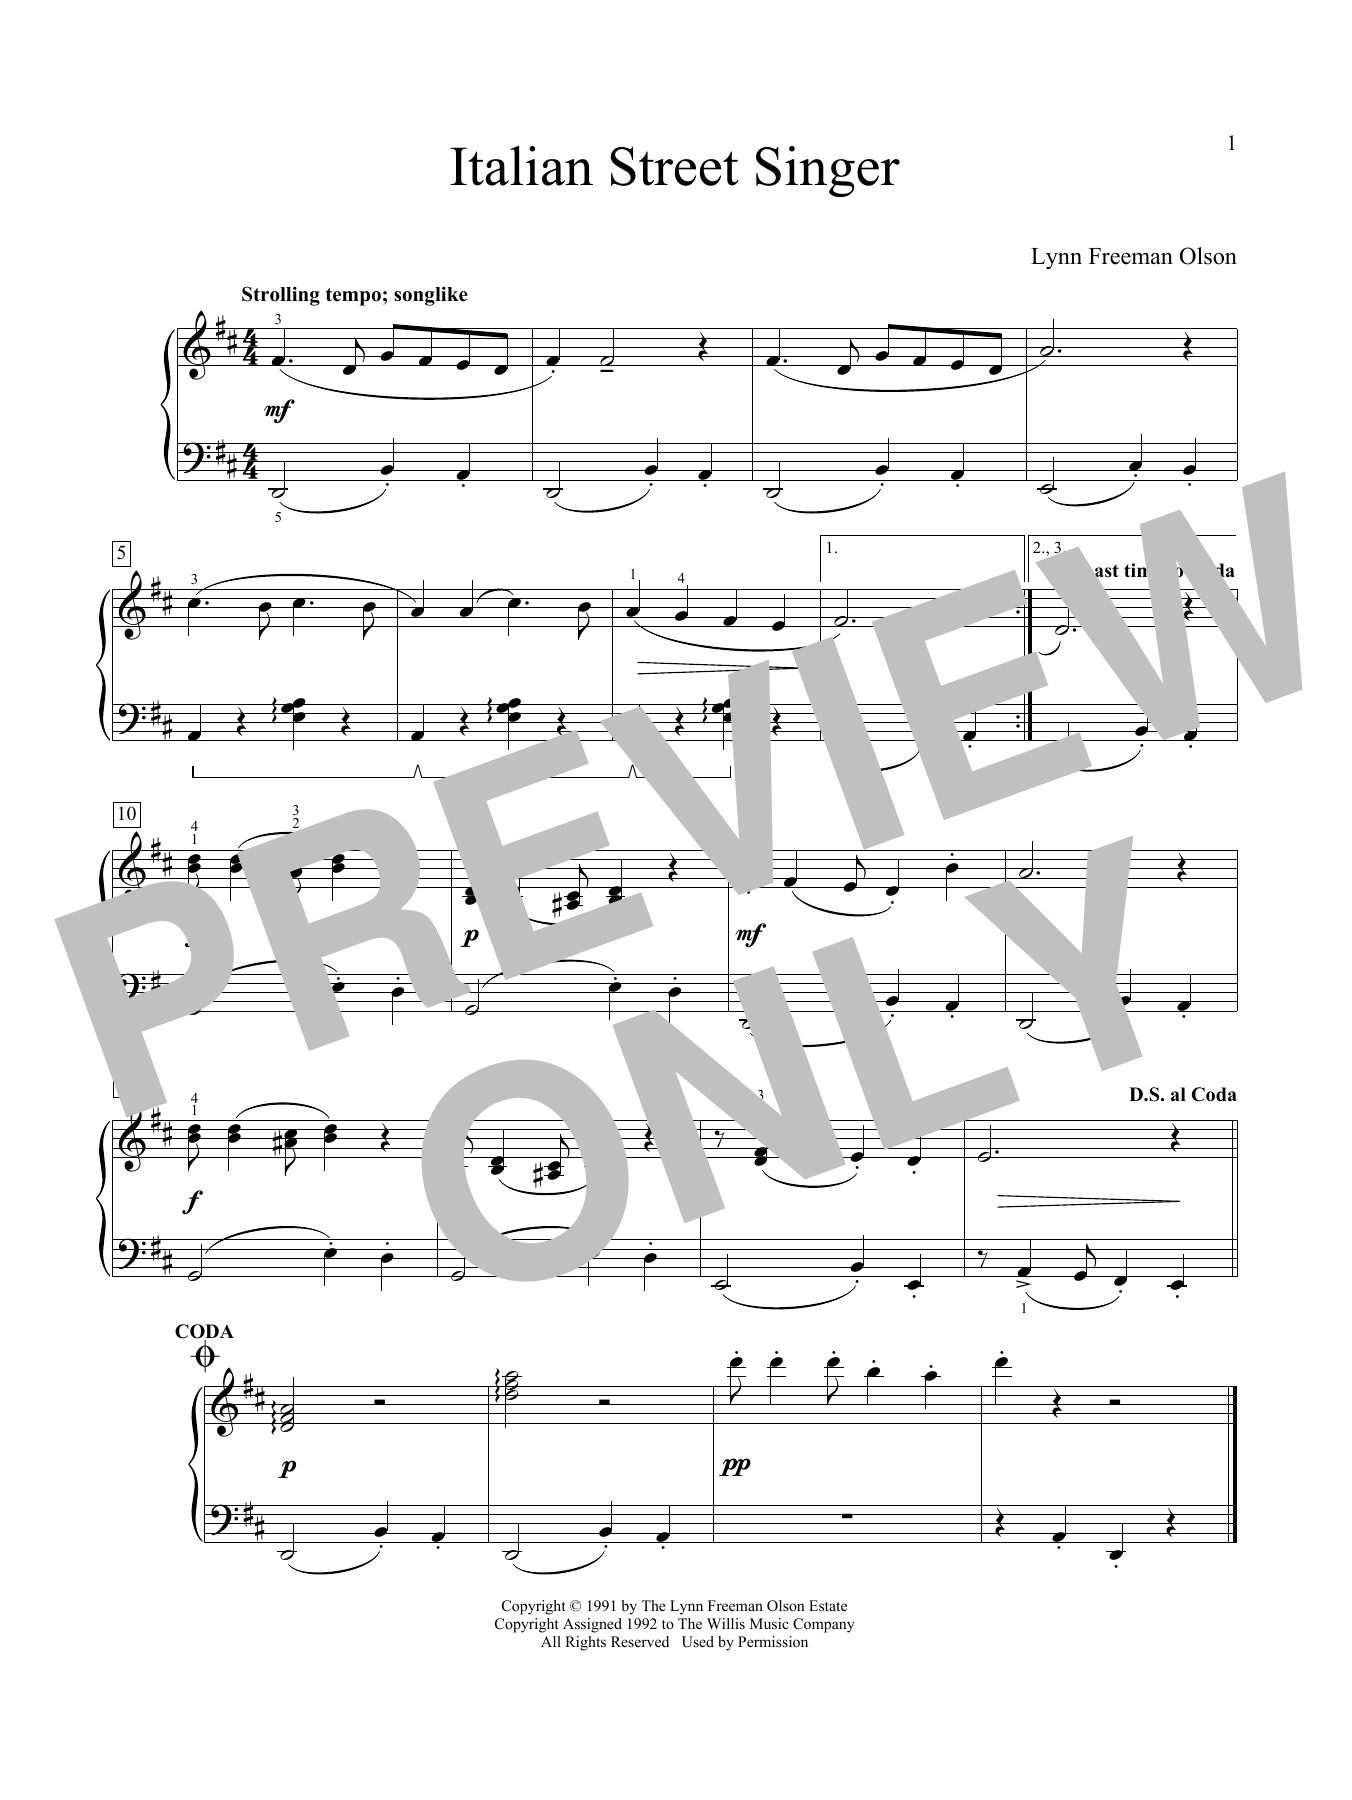 Lynn Freeman Olson Italian Street Singer sheet music preview music notes and score for Educational Piano including 1 page(s)